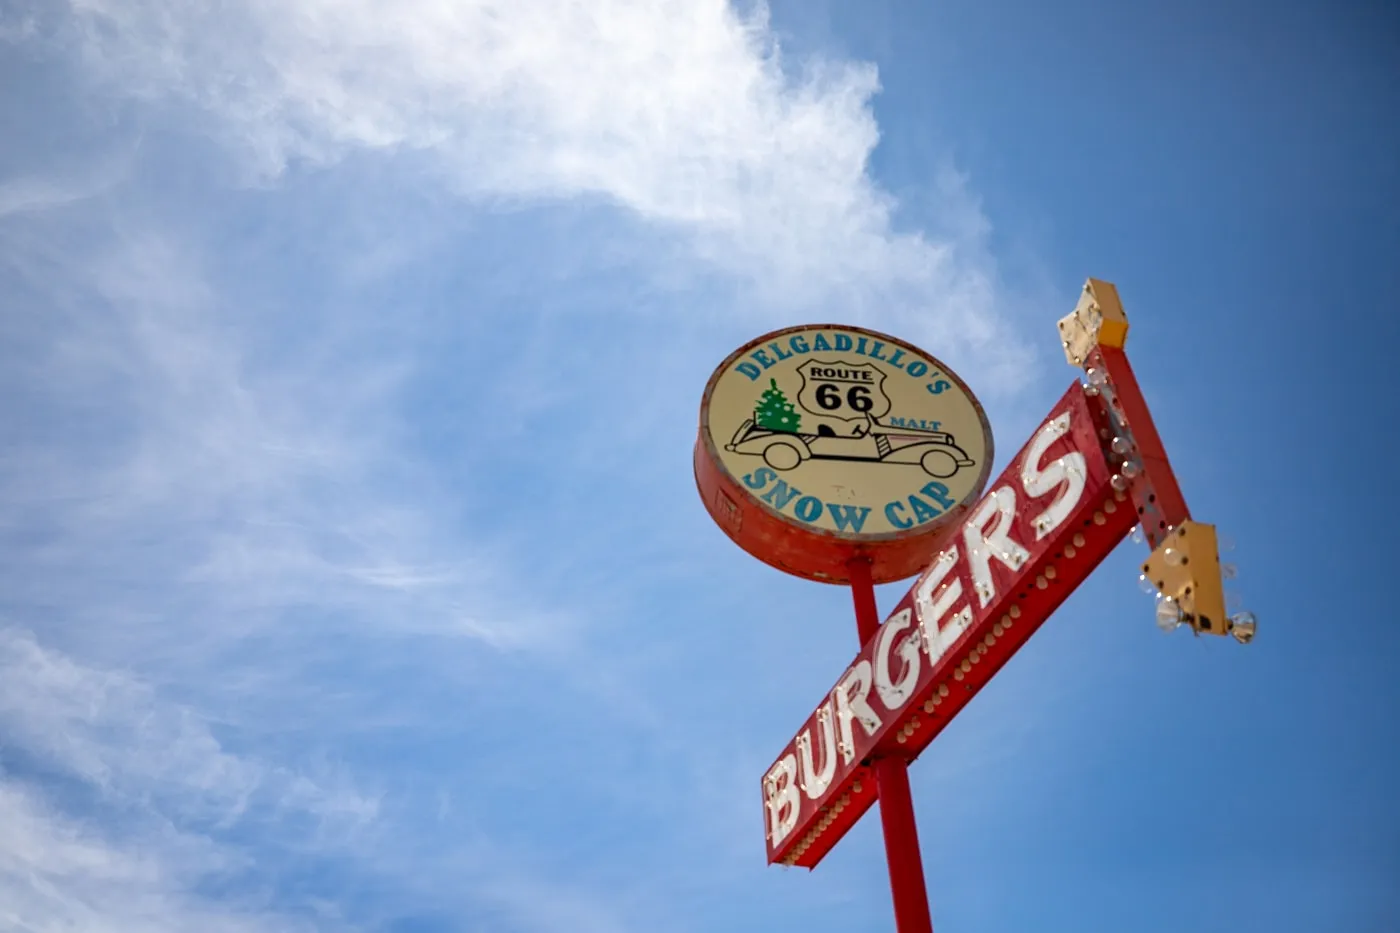 Neon Burgers sign at Delgadillo’s Snow Cap in Seligman, Arizona - Route 66 restaurant and Drive-In Diner